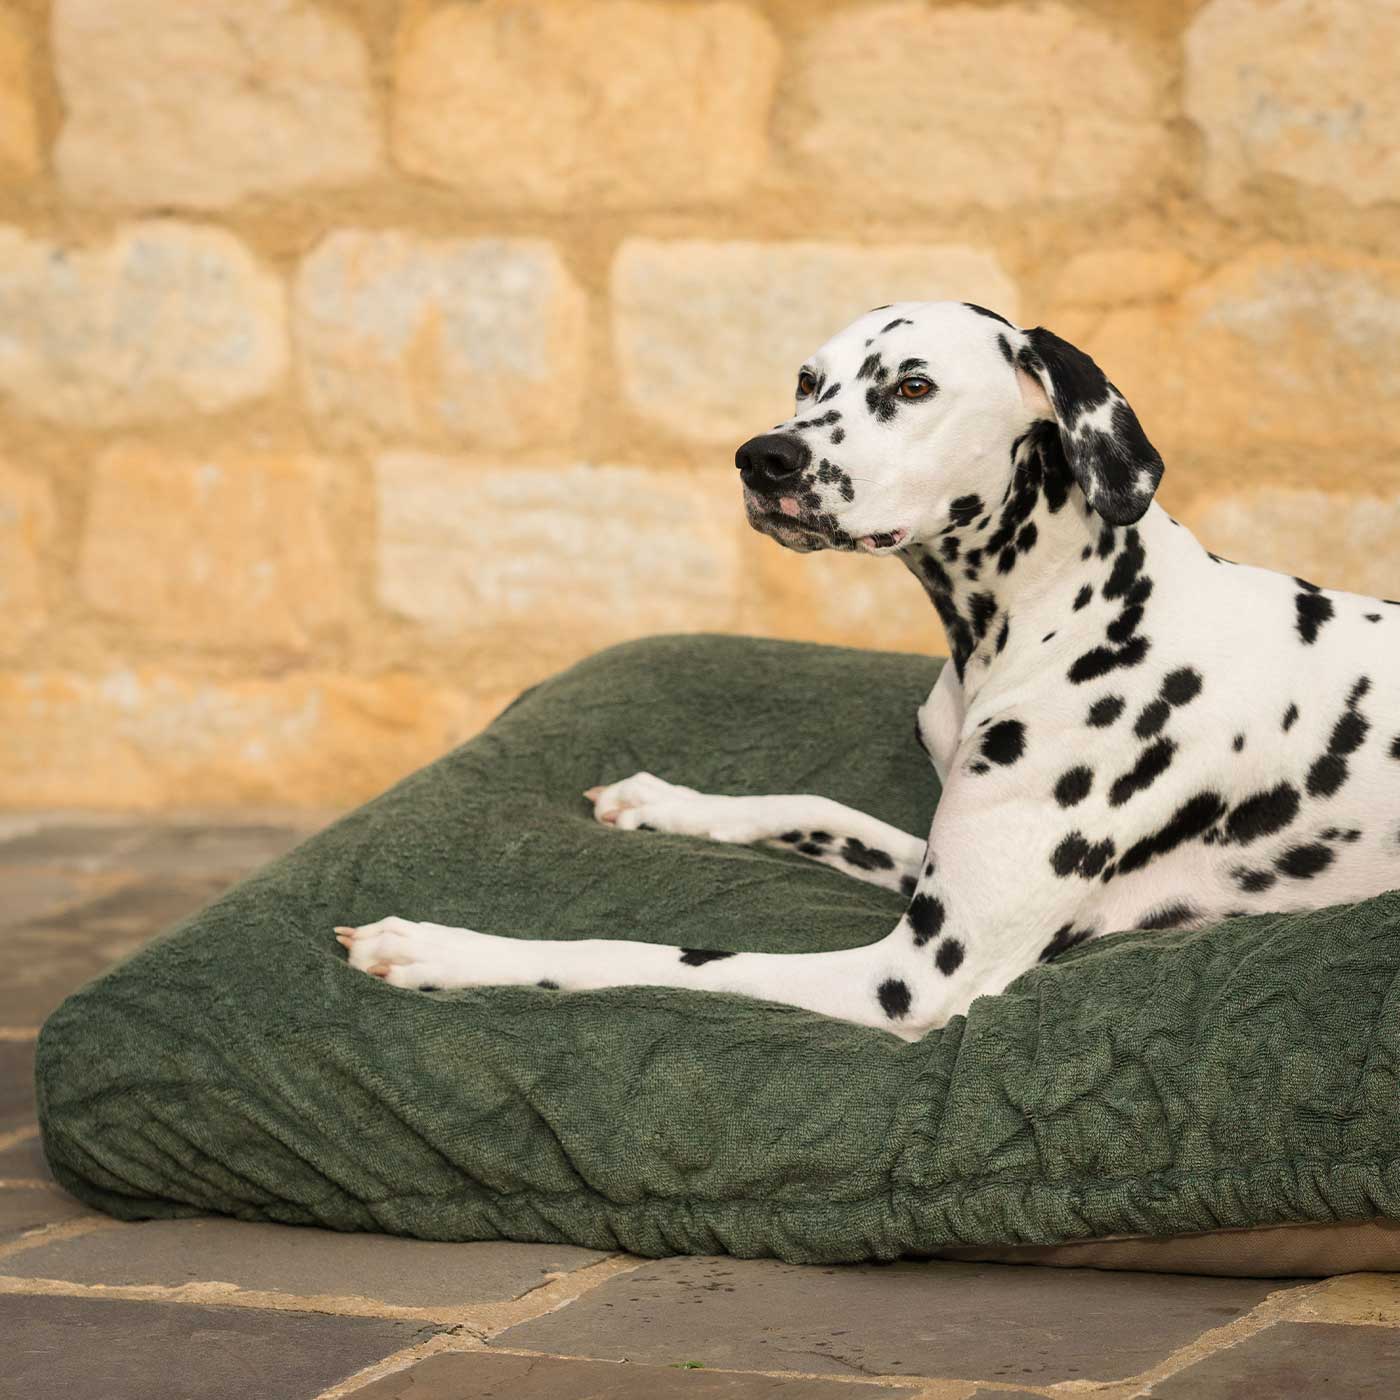 Introducing the ultimate bamboo dog drying cushion cover in beautiful fir green, made from luxurious bamboo to aid sensitive skin featuring elasticated hem for a snug fit with super absorbent material for easy pet drying! Available now at Lords & Labradors US, In three sizes and four colors to suit all breeds!